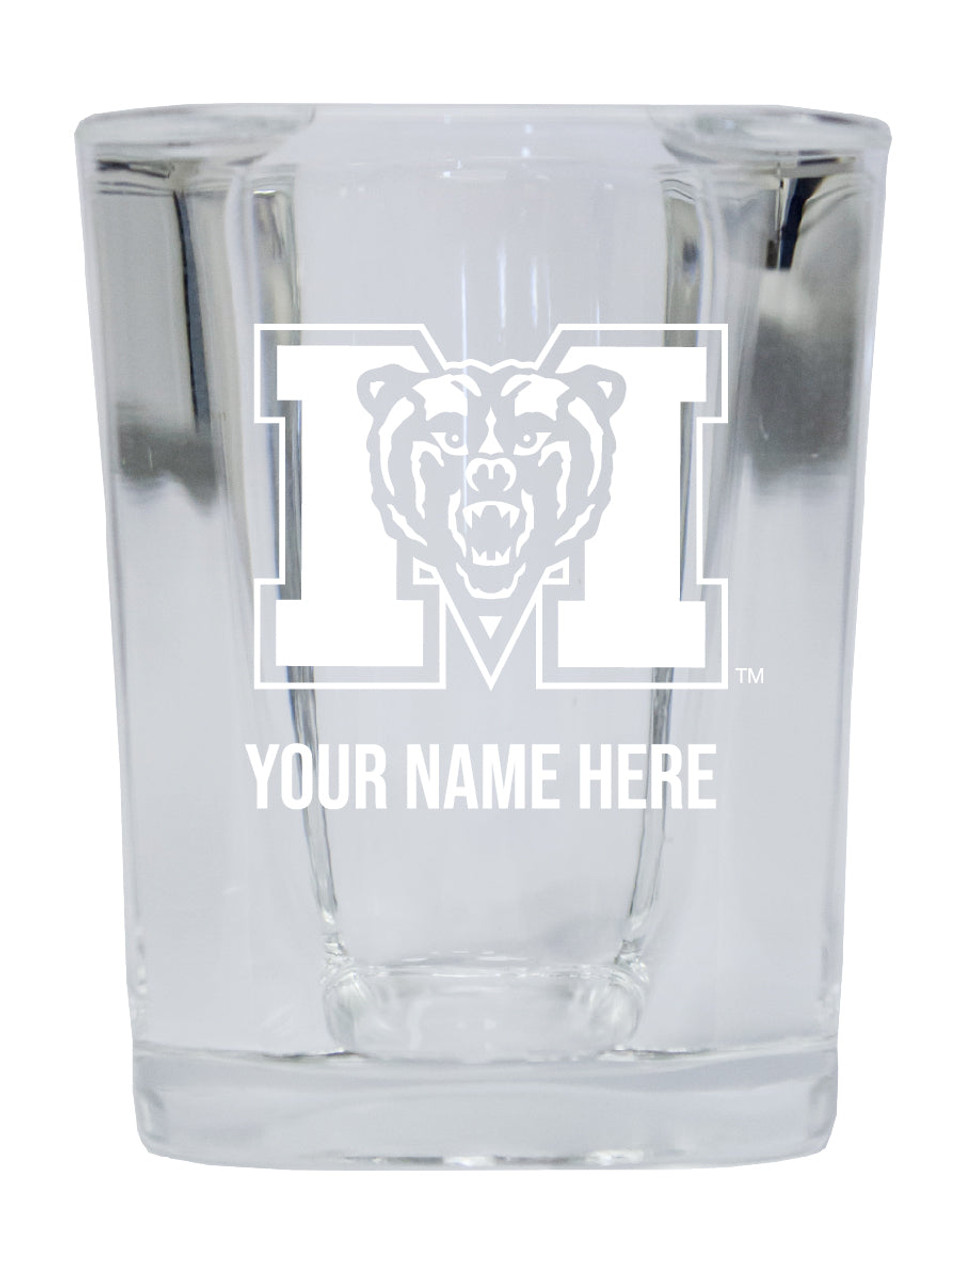 Personalized Mercer University Etched Square Shot Glass 2 oz With Custom Name